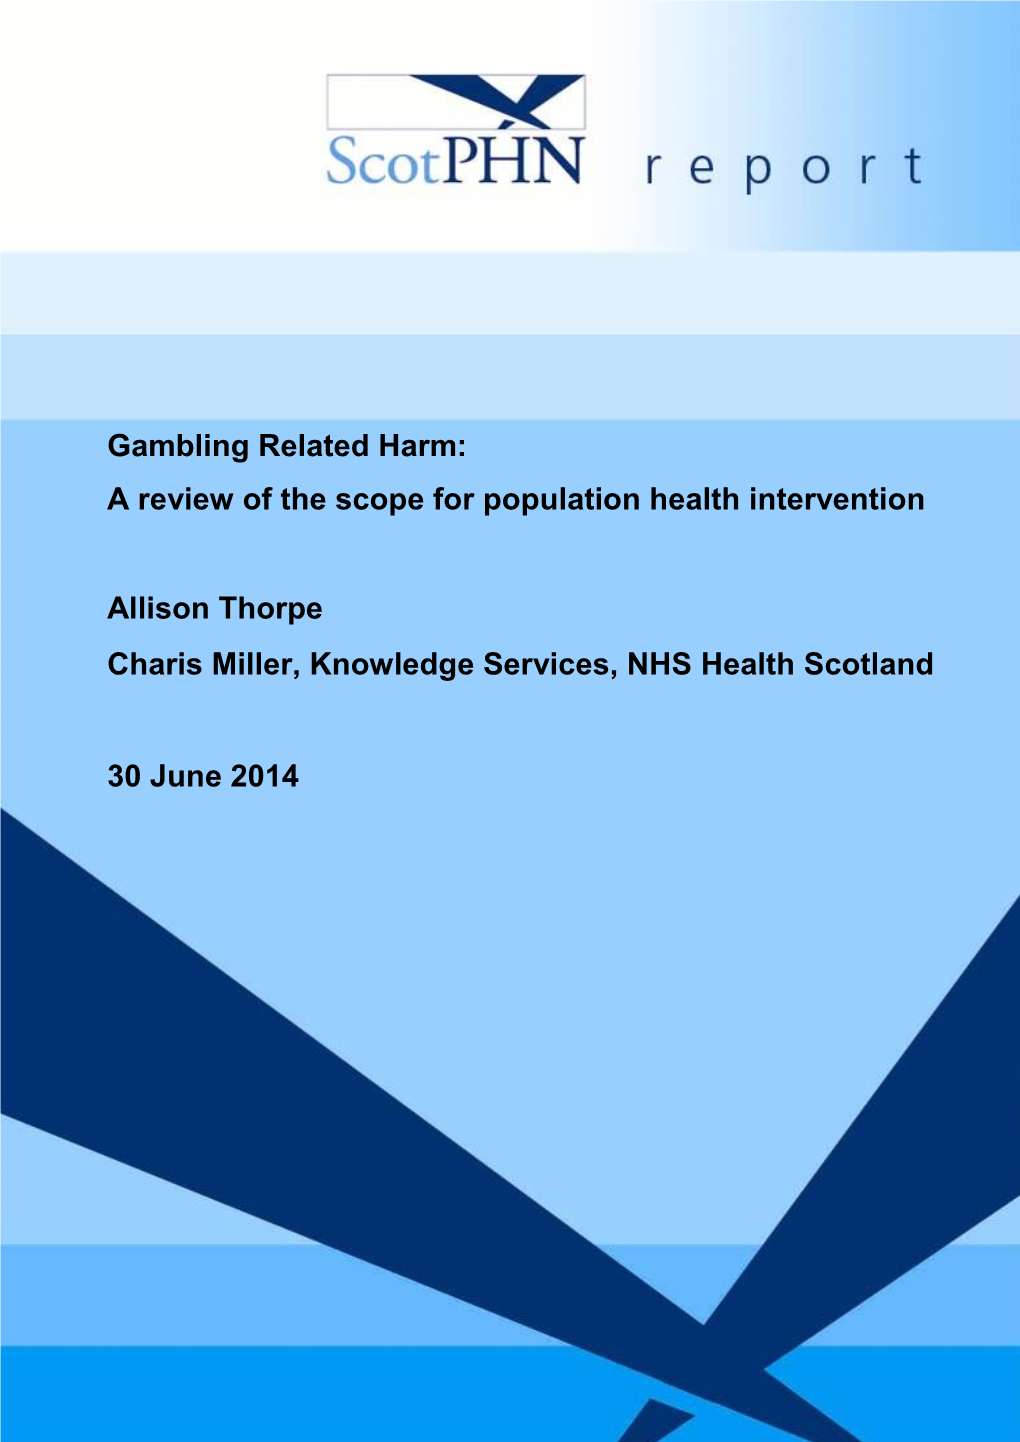 Gambling Related Harm: a Review of the Scope for Population Health Intervention